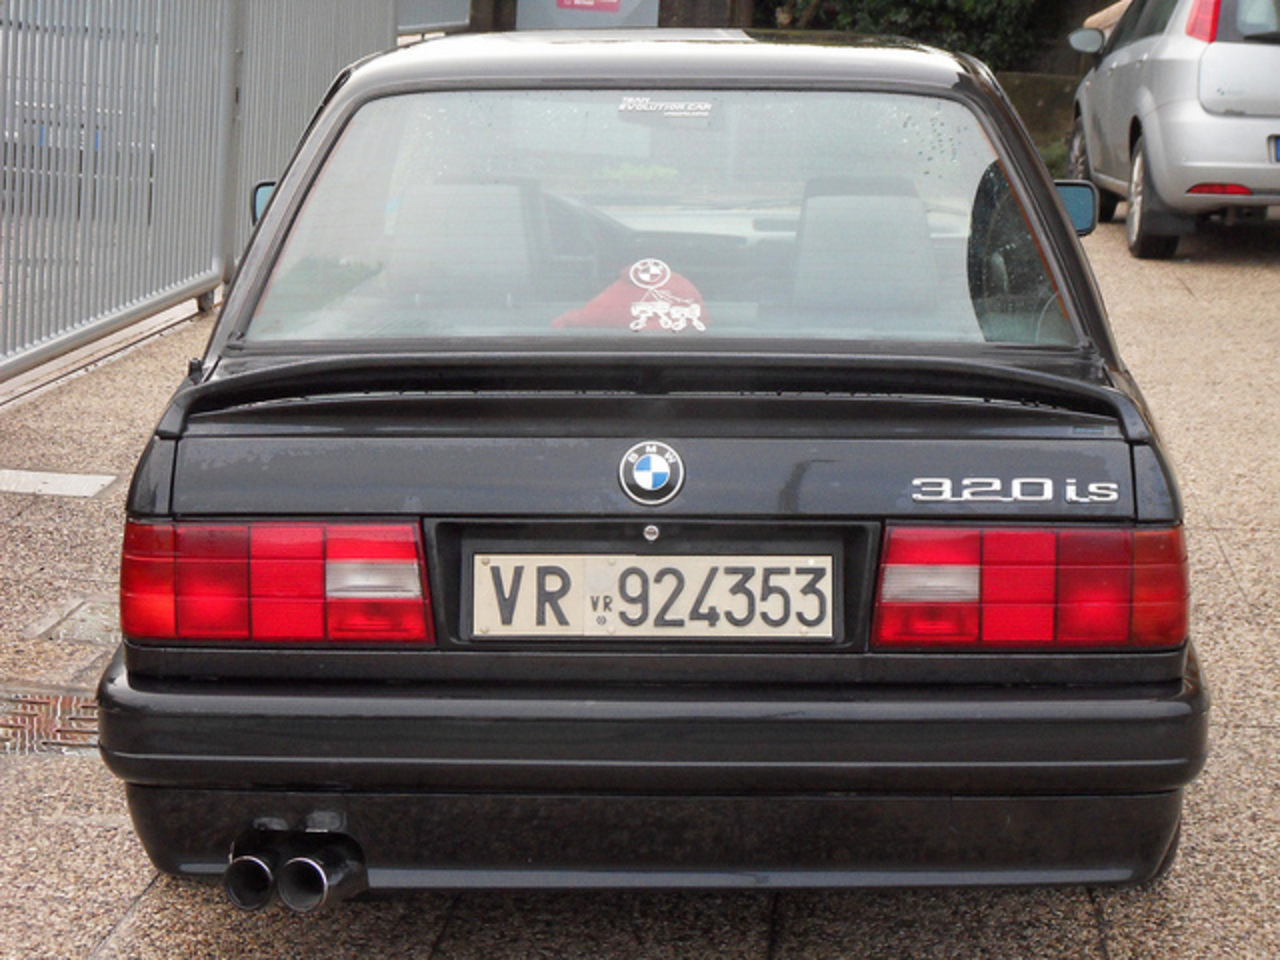 BMW 320is | Flickr - Photo Sharing!